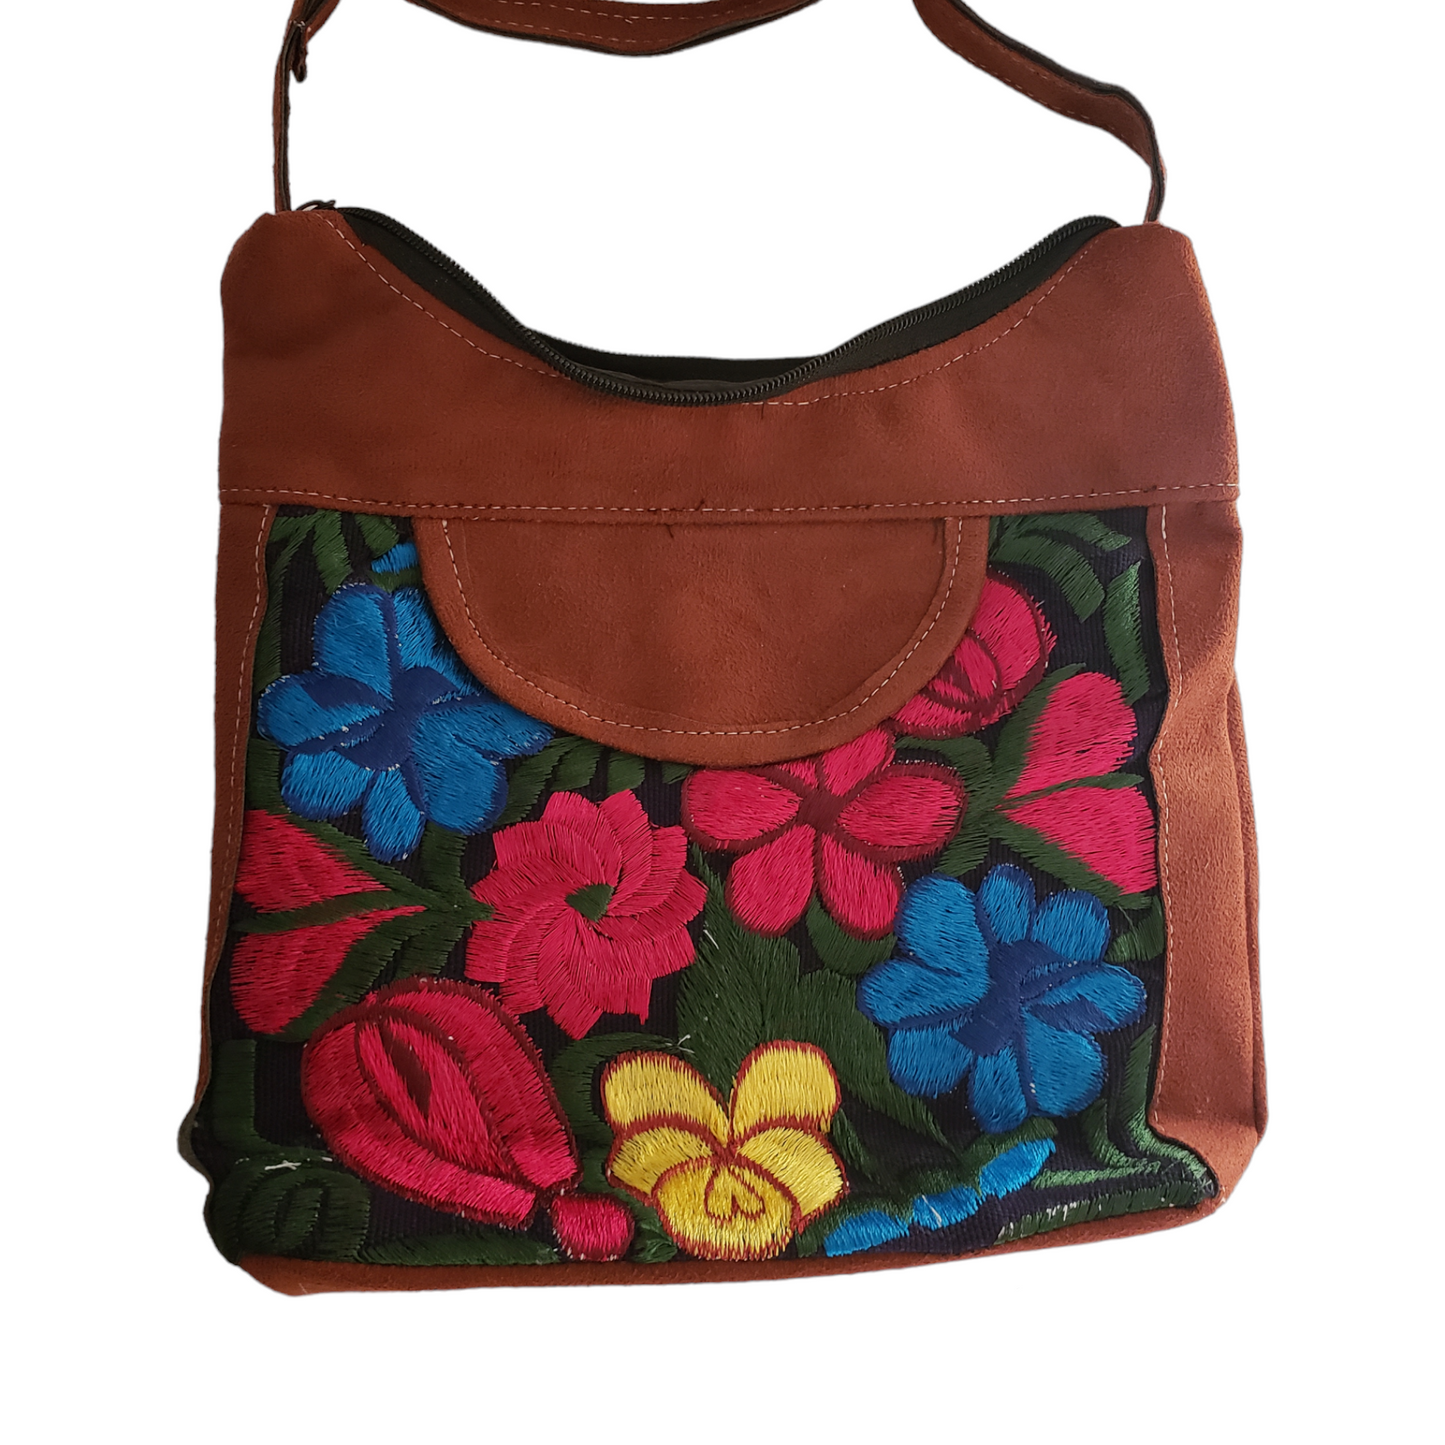 Mexican Embroidered Floral Leather Bag Shoulder Crossbody